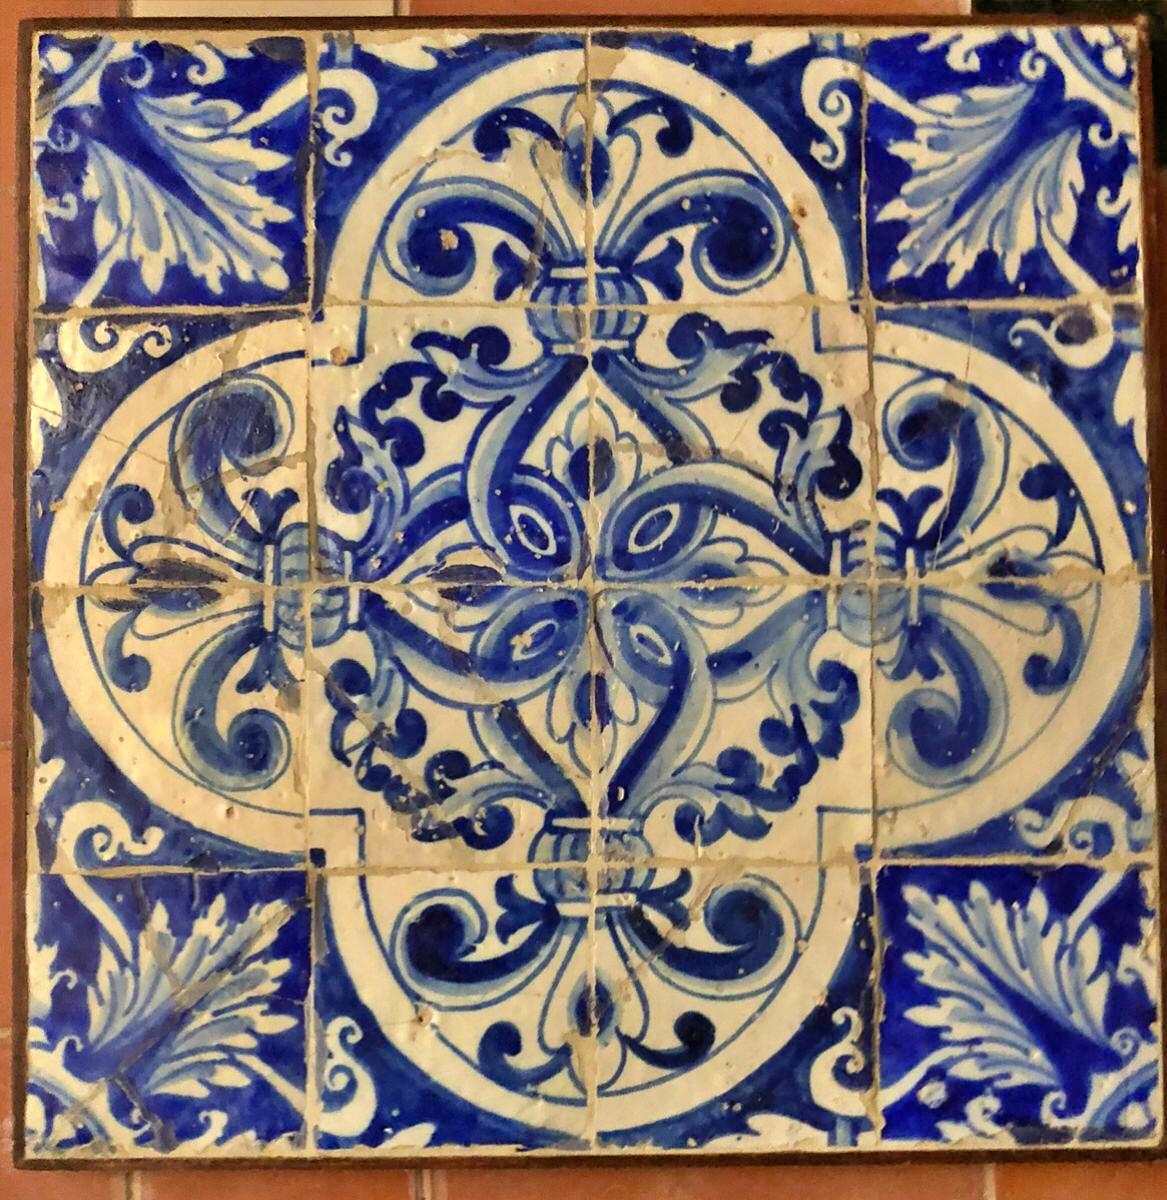 17th Century Portuguese tile panel.
Restored
56cm x 56cm
14cm x 14cm tiles

17th Century

Shortly afterwards, these plain white tiles were replaced by polychrome tiles (enxaquetado rico) often giving a complex framework such as in the Igreja